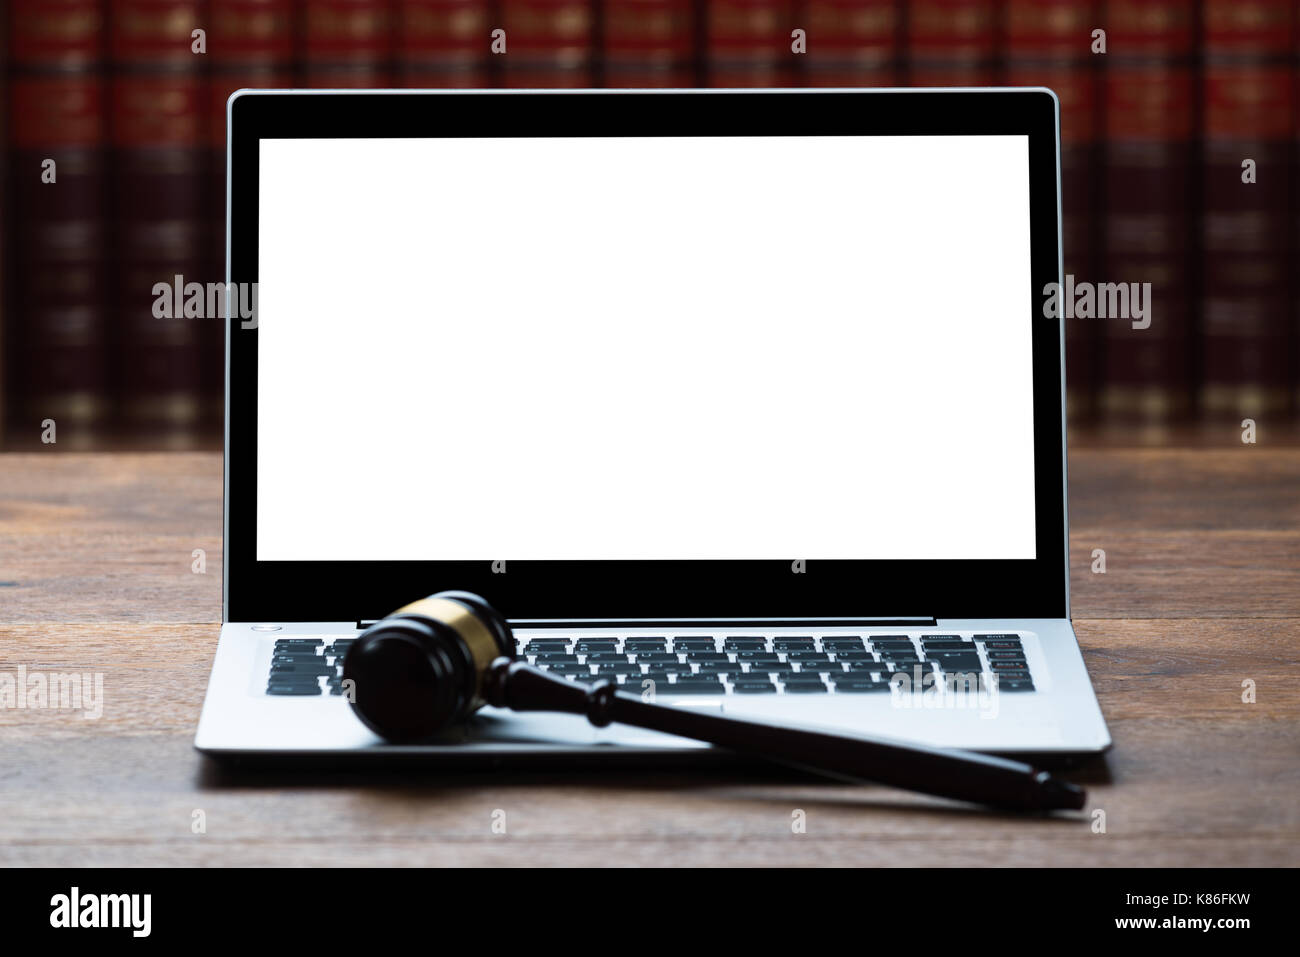 Closeup of laptop and mallet on table in courtroom Stock Photo